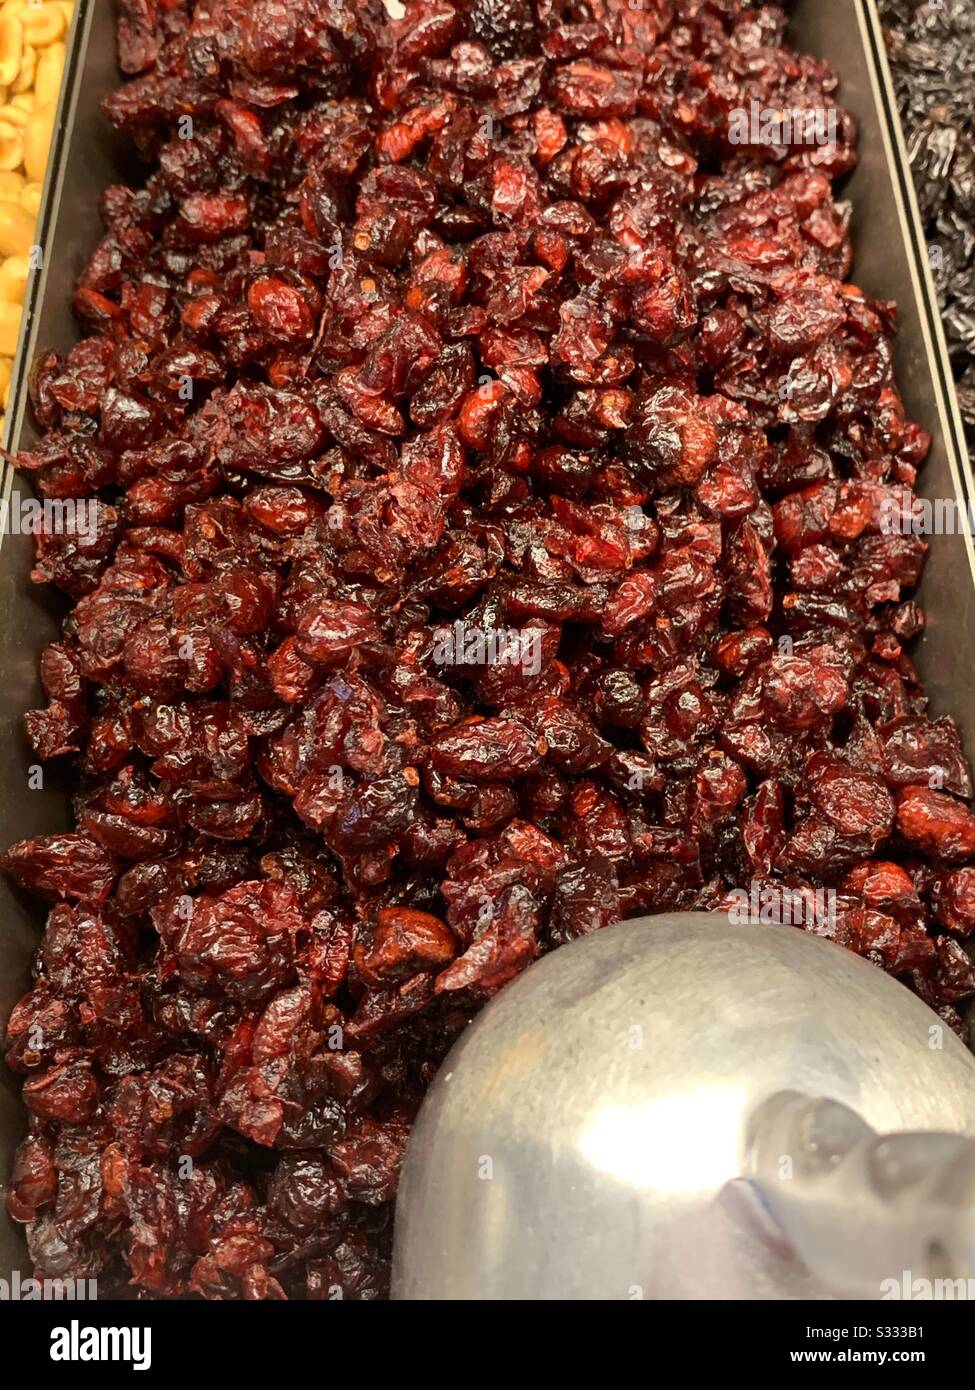 Buffet dish full of dried cranberries with a metal scoop in a trail mix bar Stock Photo